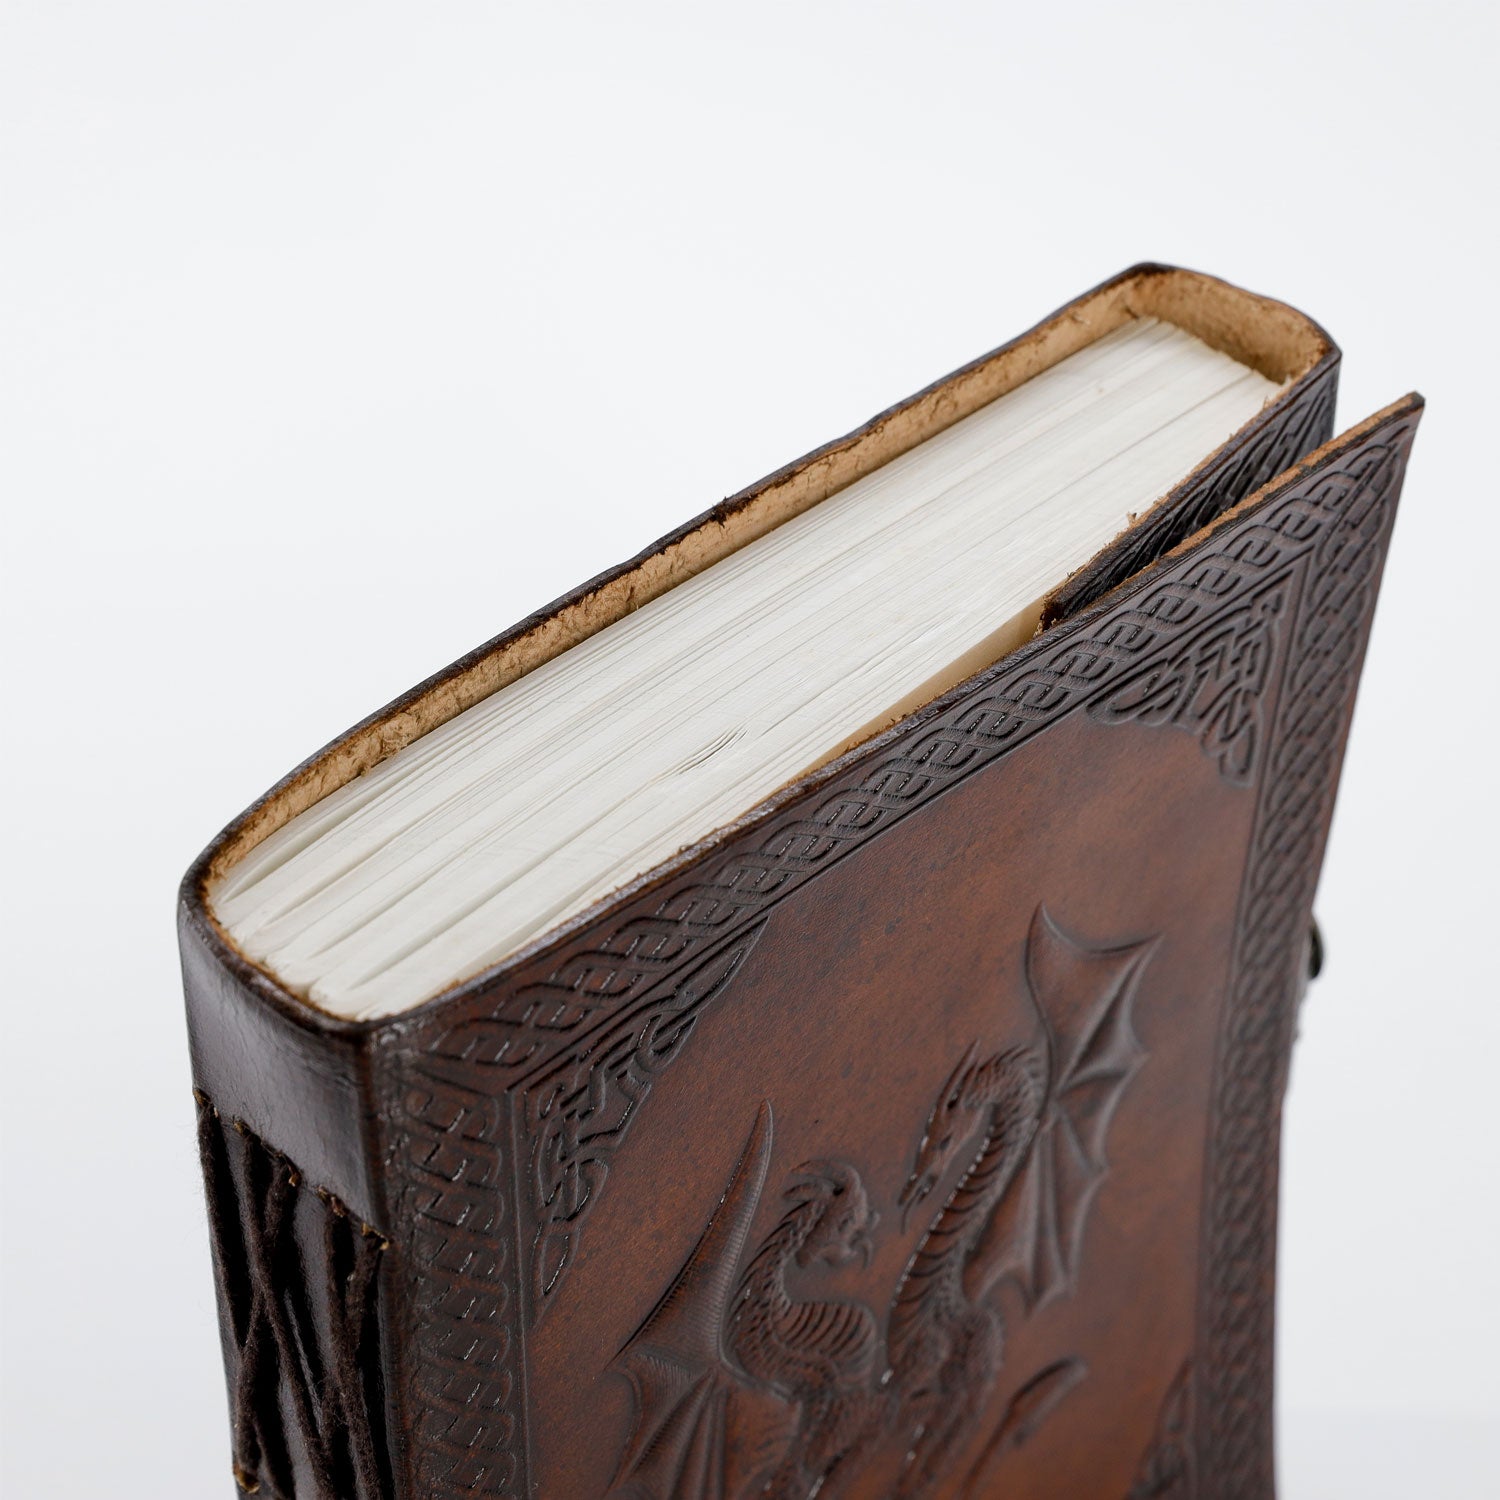 Unique unlined Double Dragon Handmade Leather Writing Drawing Journals